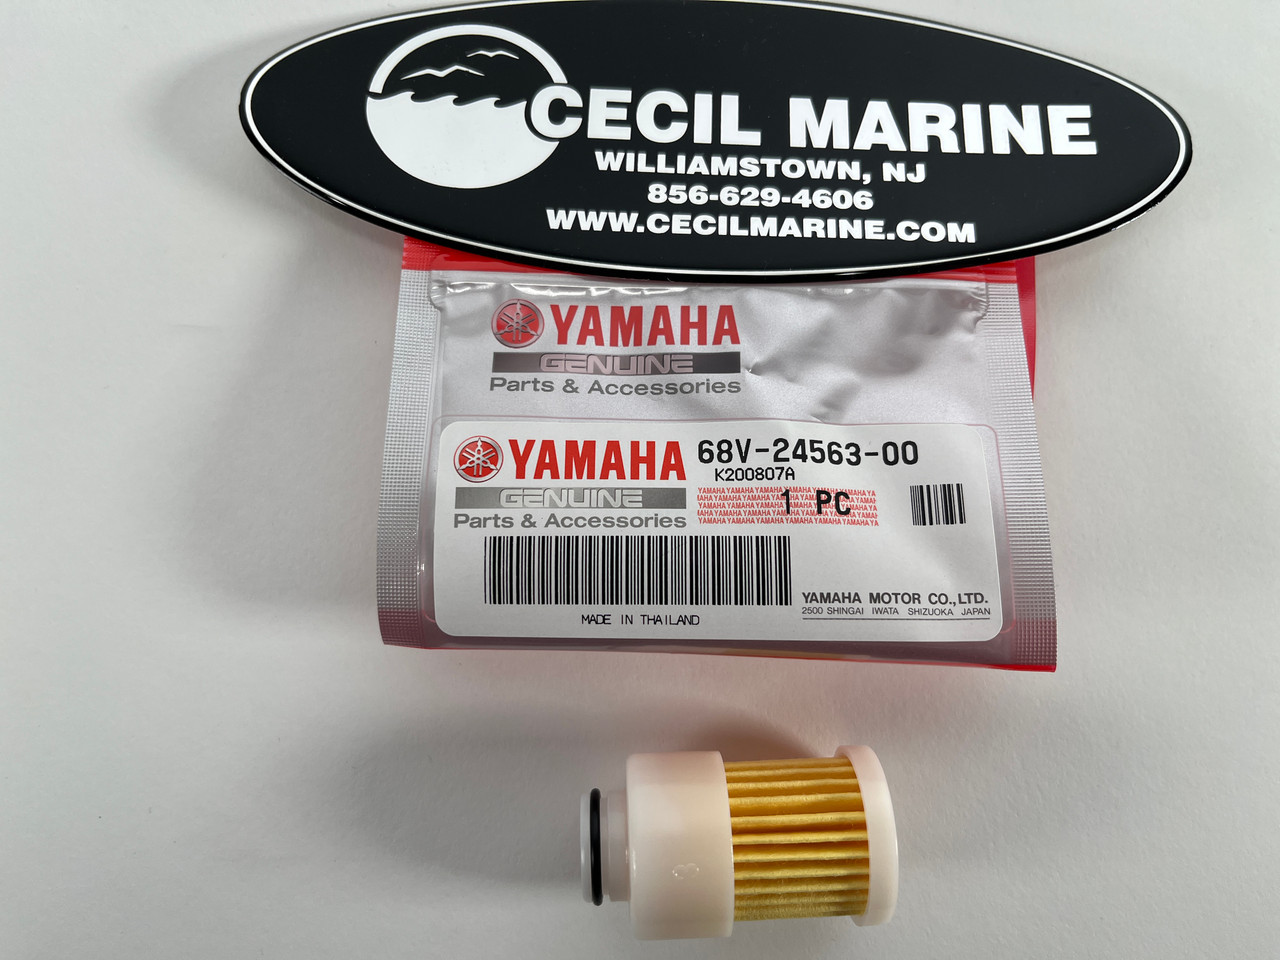 $17.99 GENUINE YAMAHA Outboard Fuel Filter 68V-24563-00-00 In Stock And Ready To Ship**